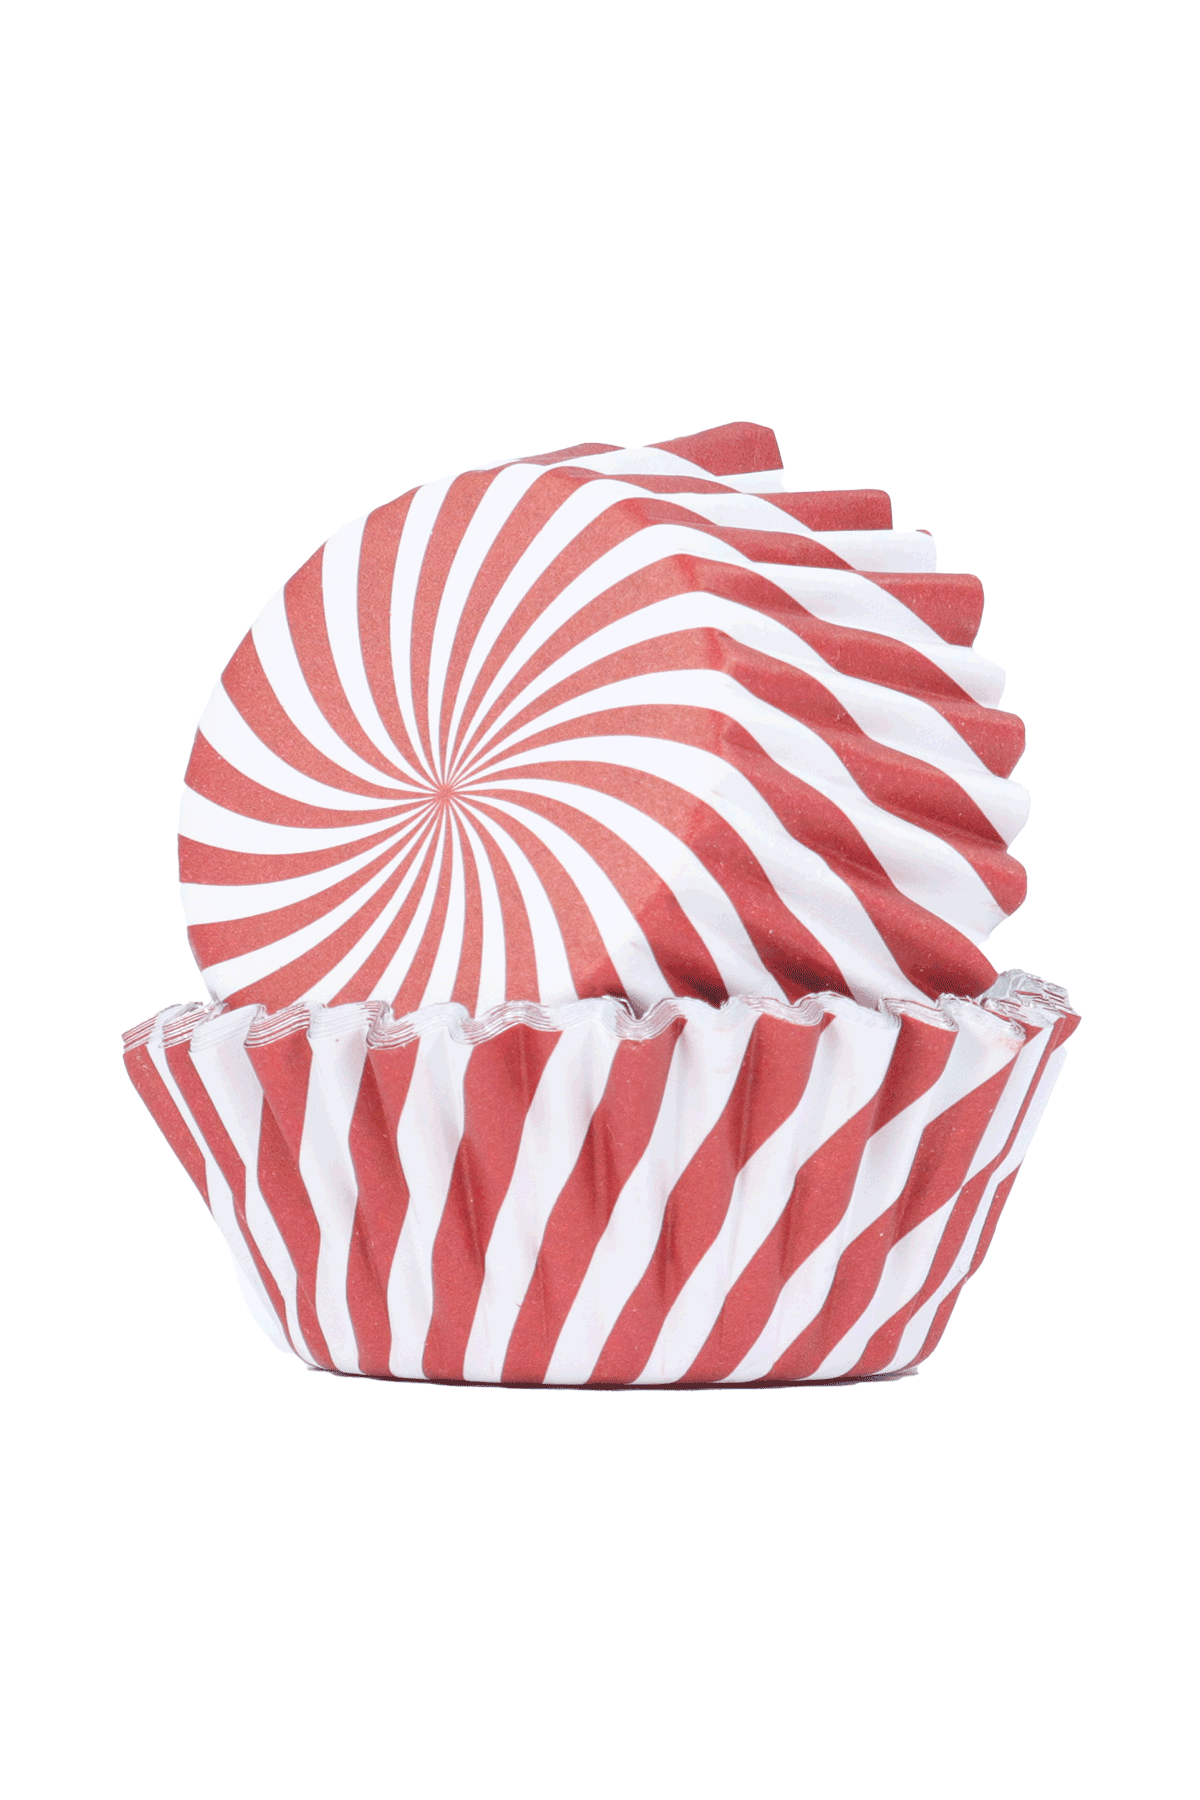 Cupcake Cases - Christmas Candy Canes - 30 Pack Cupcake Cases PME